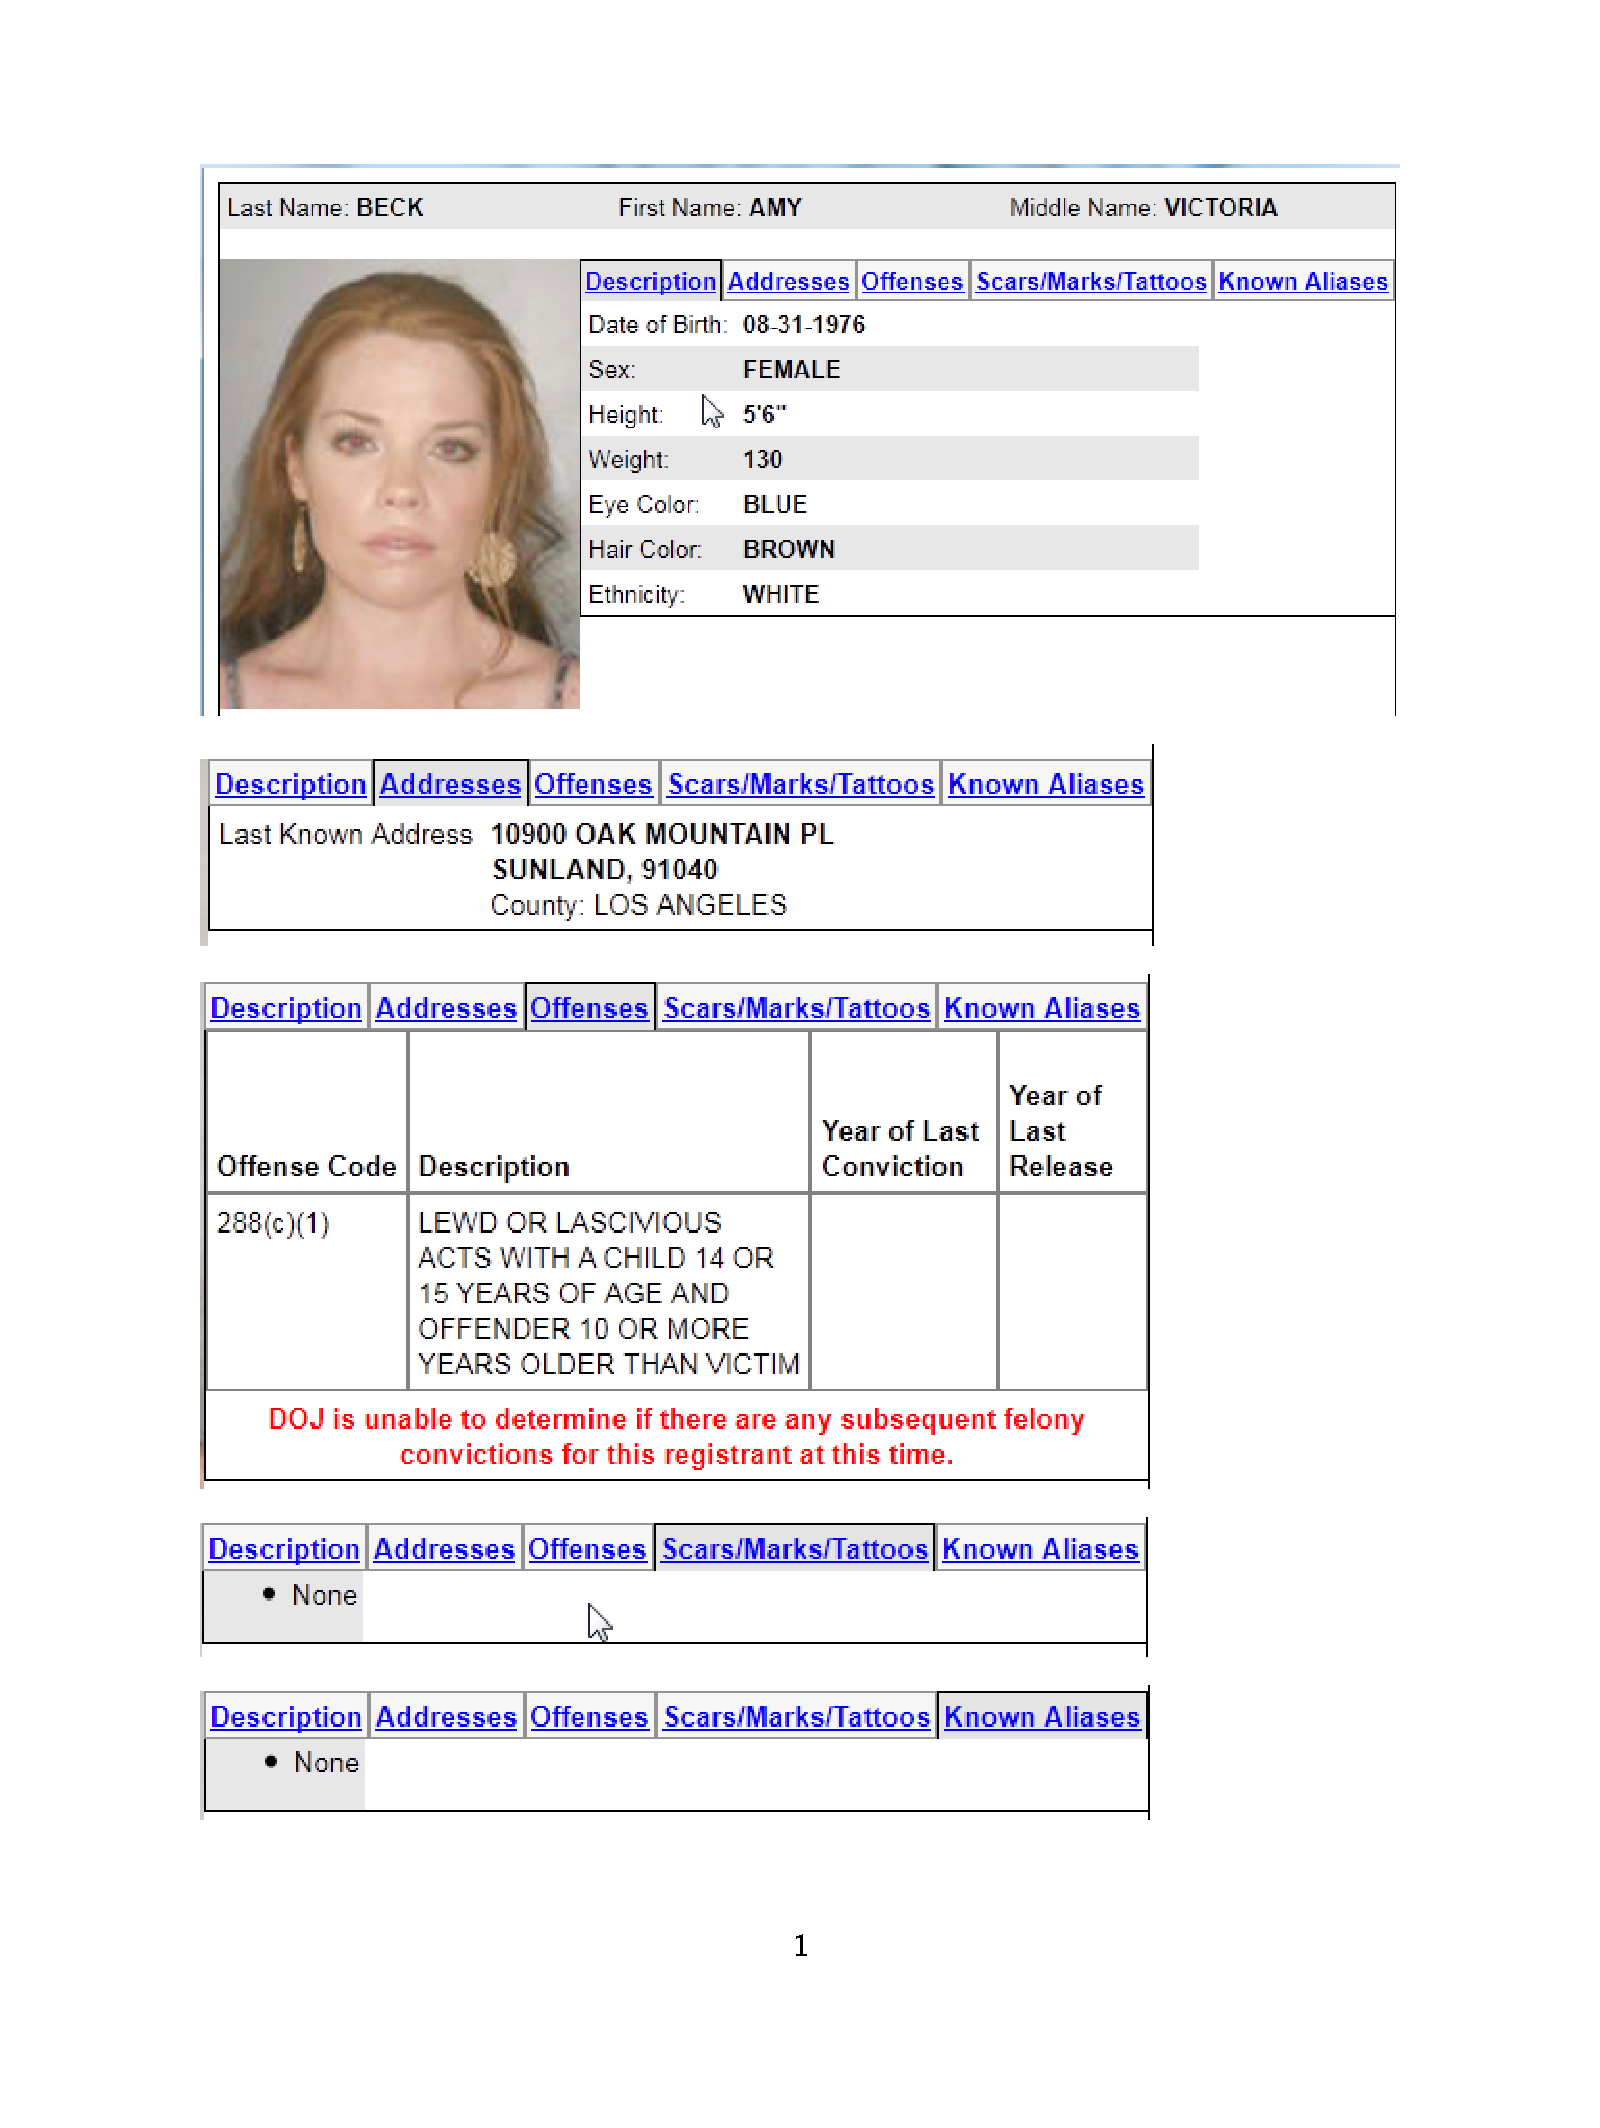 Copy of beck amy ca sex offender registry 201109111.png